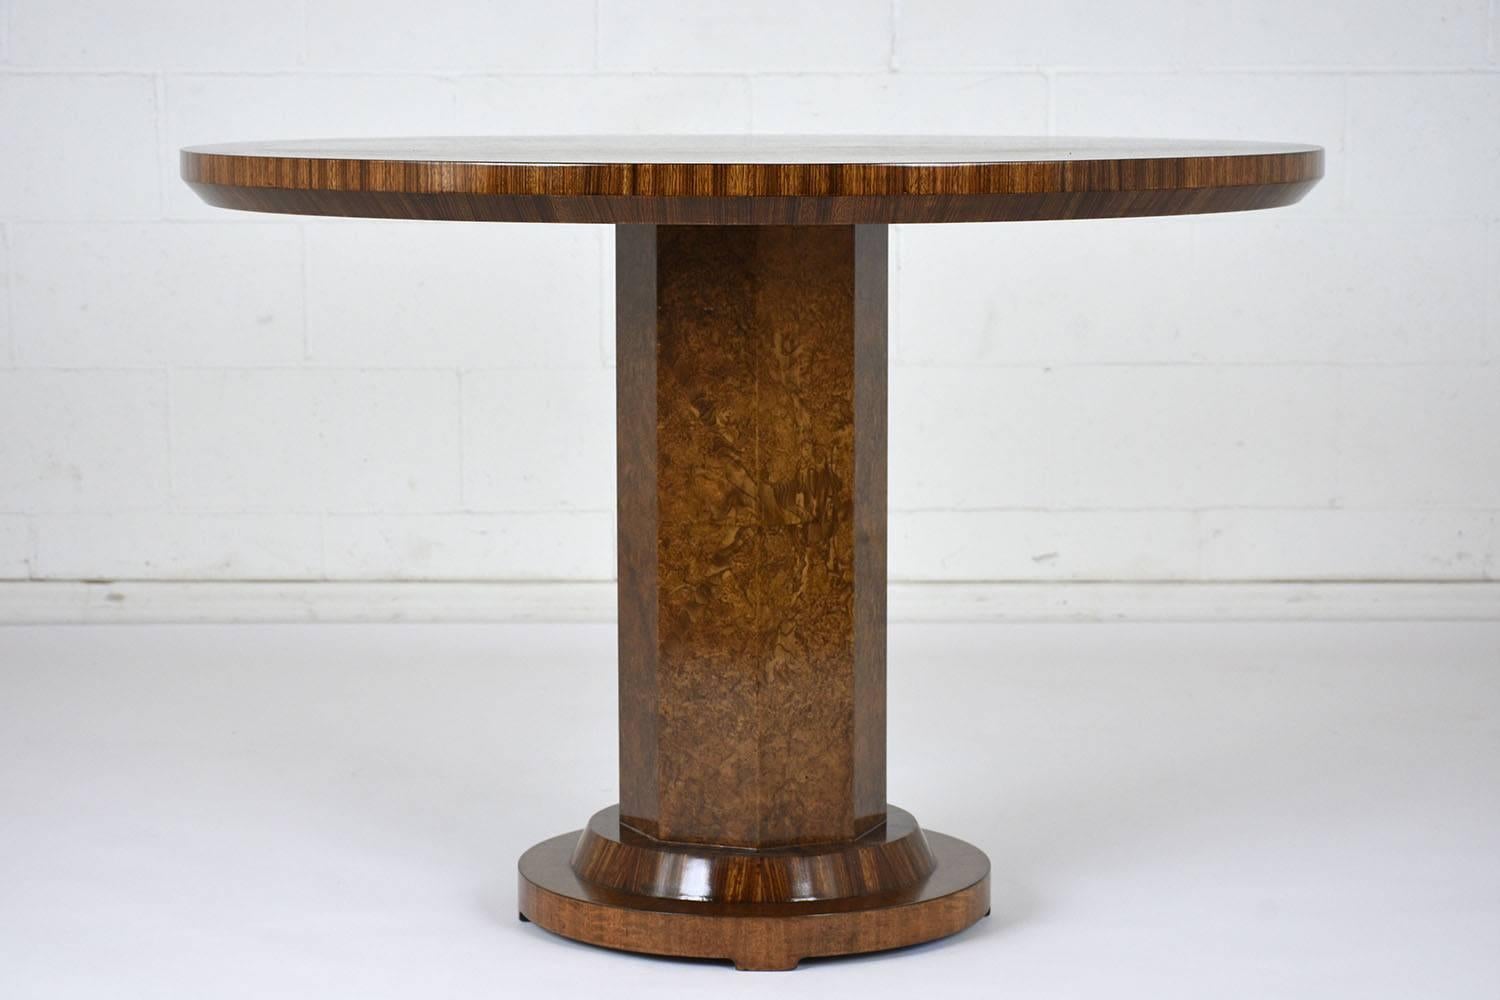 This 1960s French Art Deco-style Lacquered round center table is covered in walnut wood veneers stained a rich walnut color with a lacquered finish. The pedestal base has a faceted design with a round base. This center table is sturdy, stunning, and